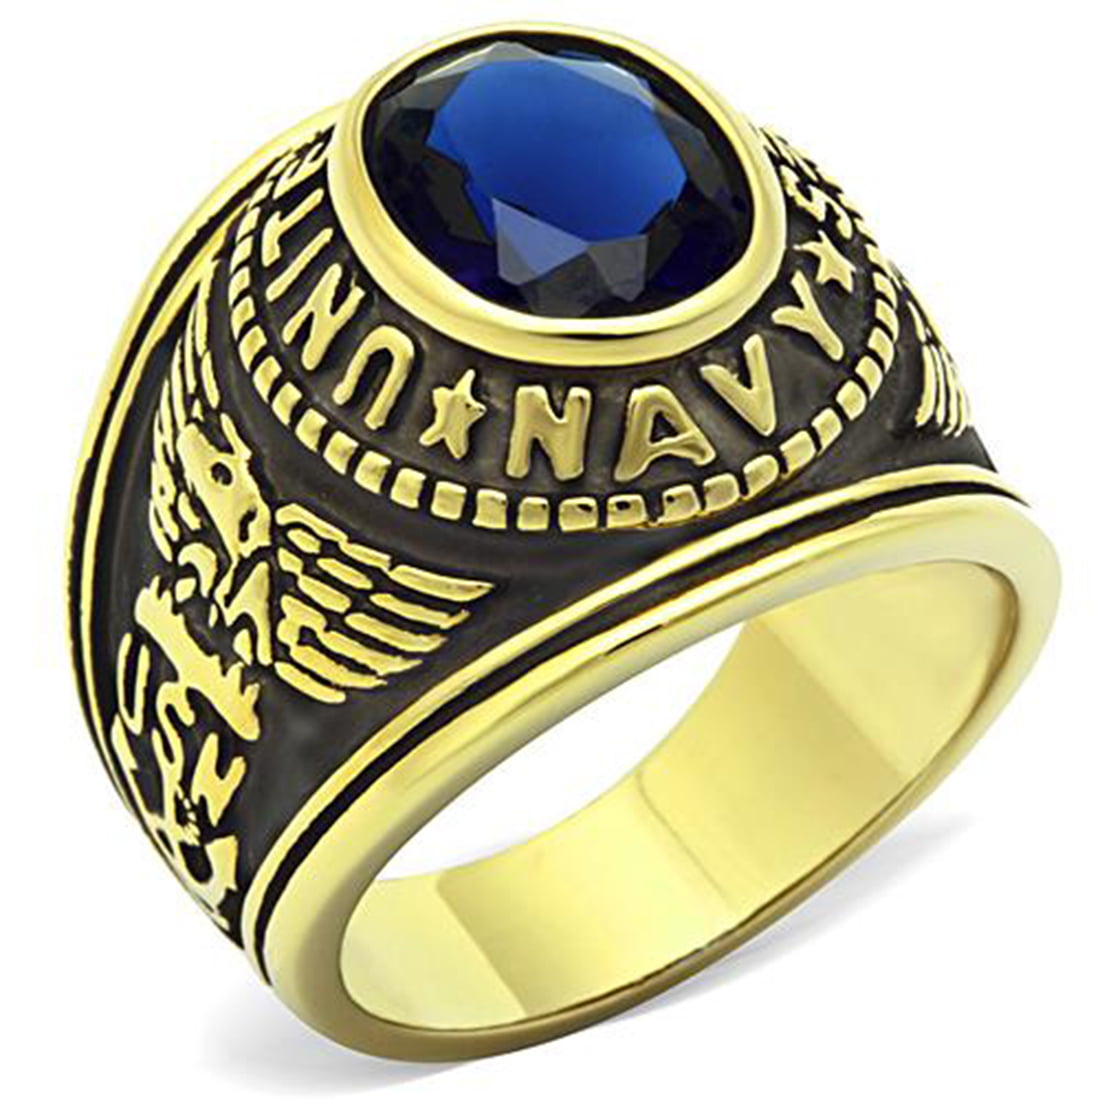 U.S NAVY MILITARY 18K ELECTROPLATE RING SAPPHIRE CRYSTAL U.S MADE SIZE 13 